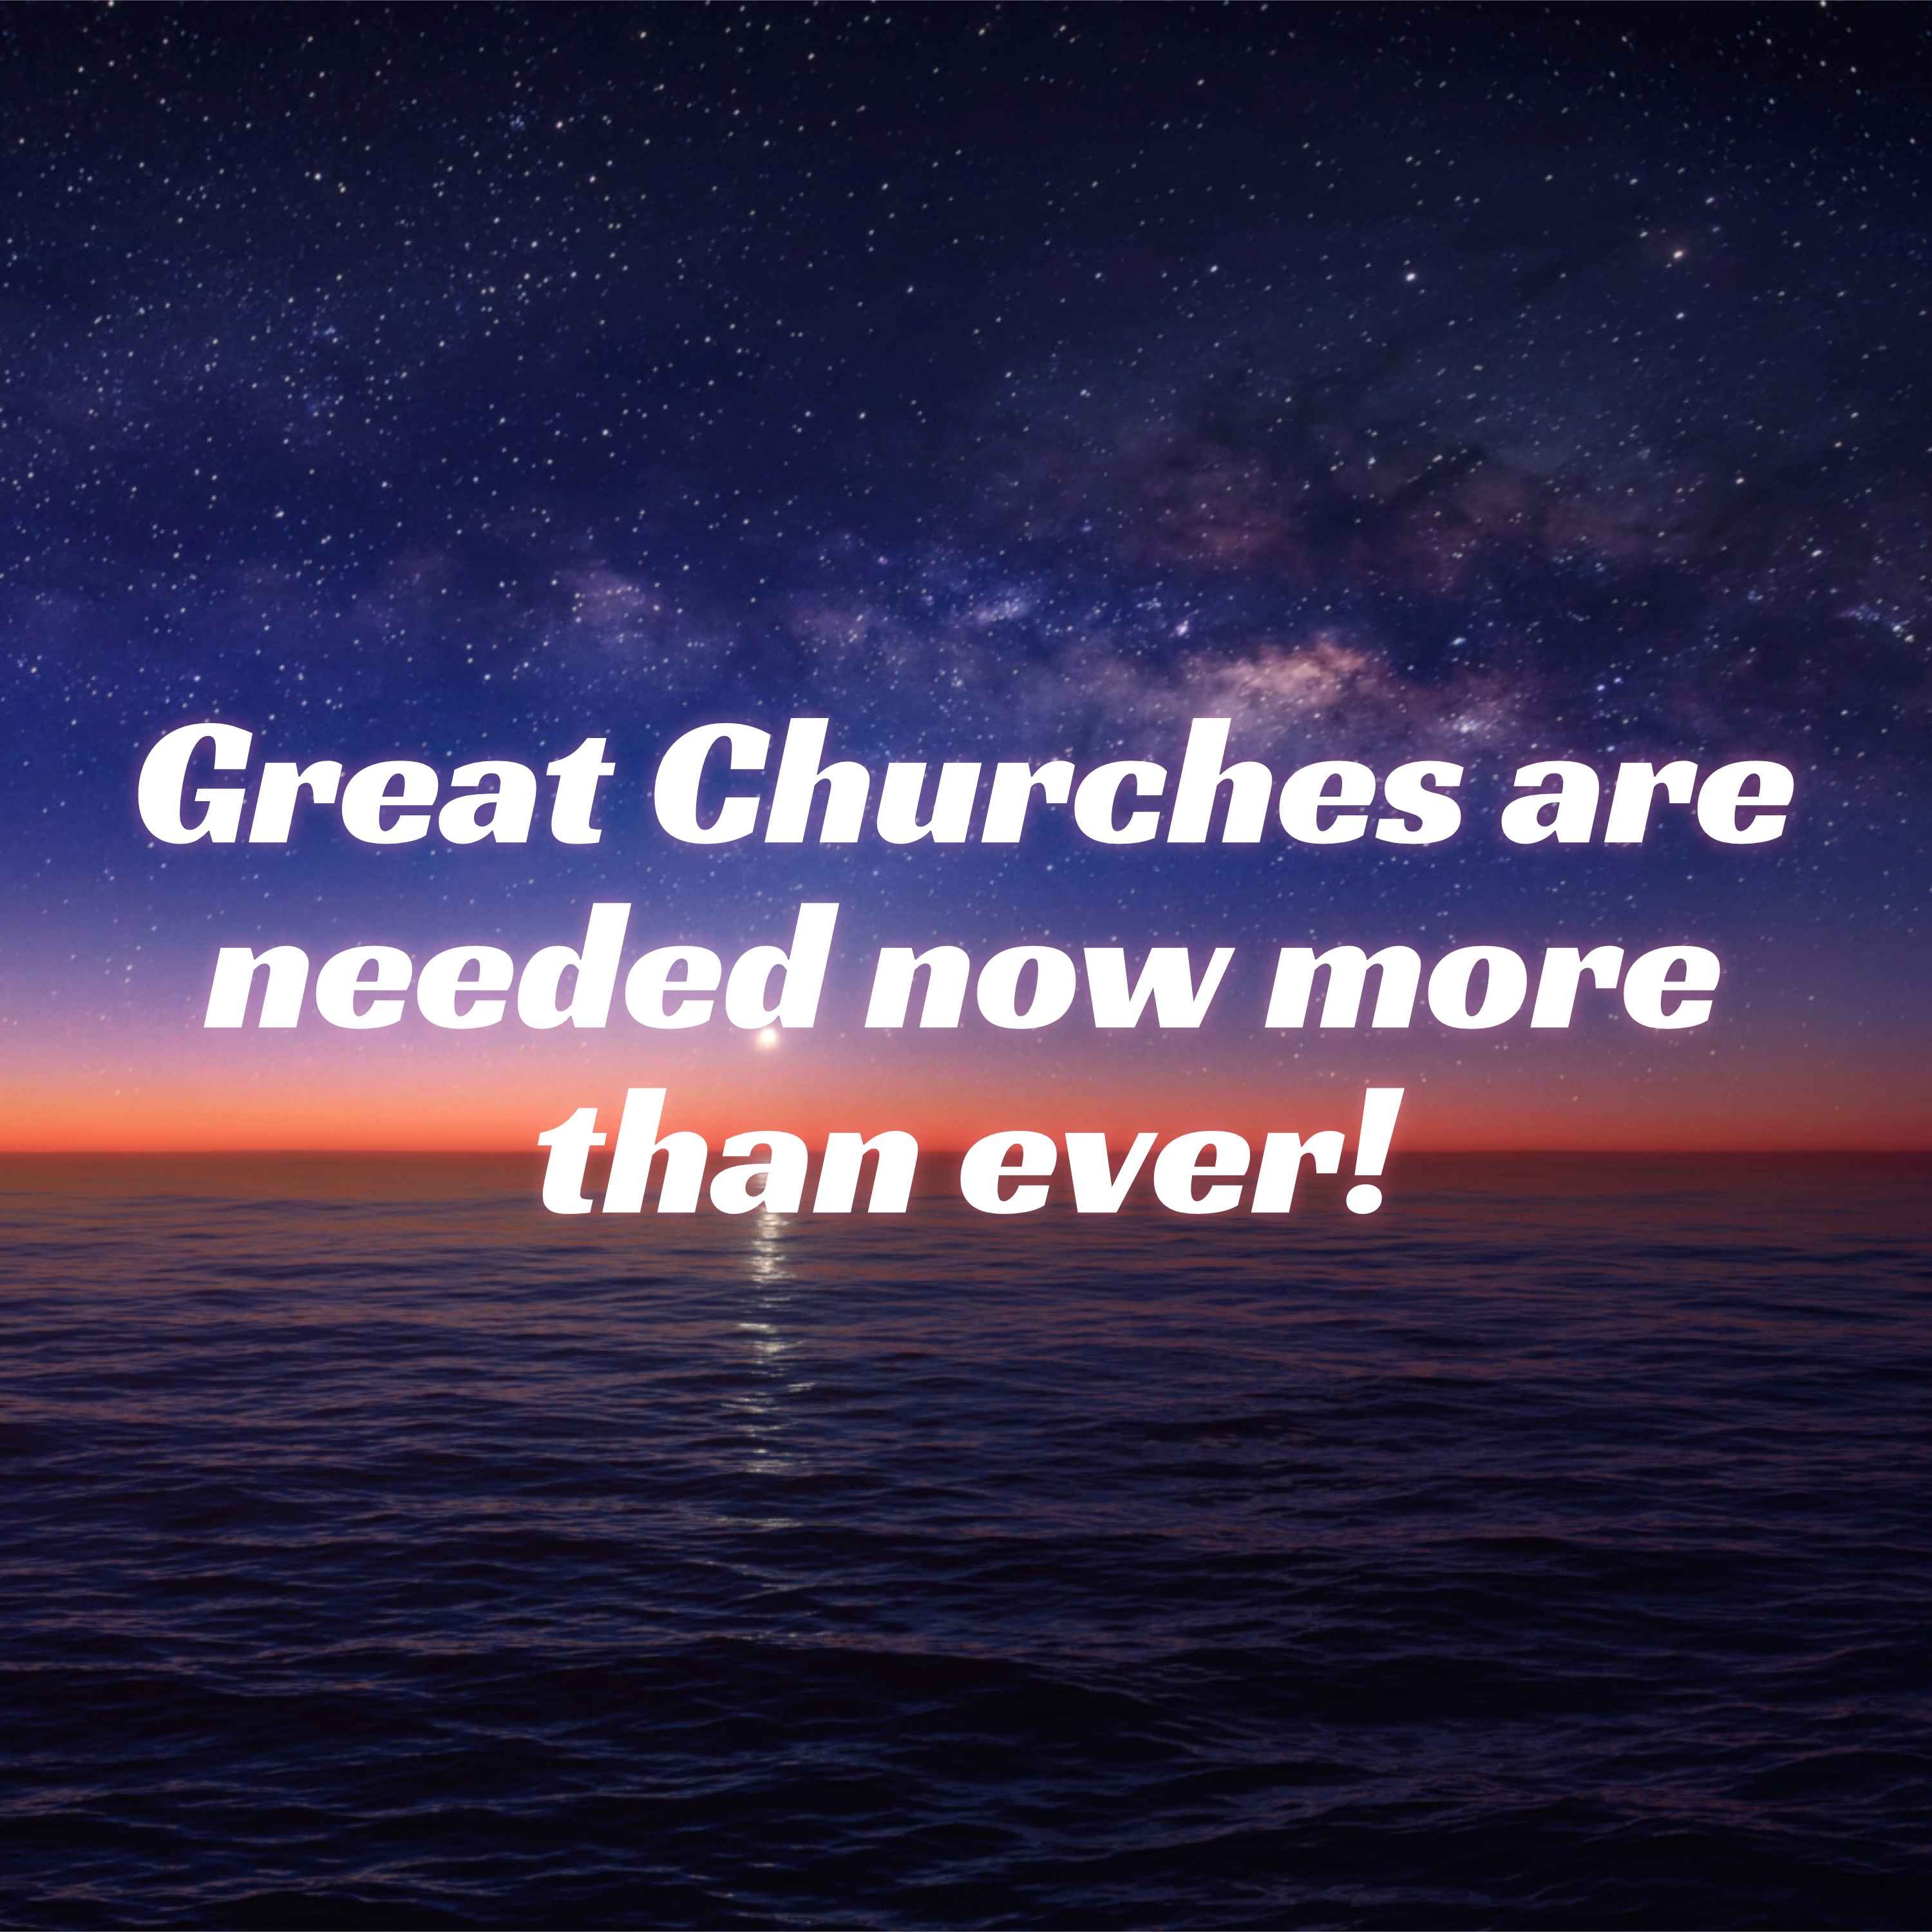 We Need Great Churches Now More Than Ever.